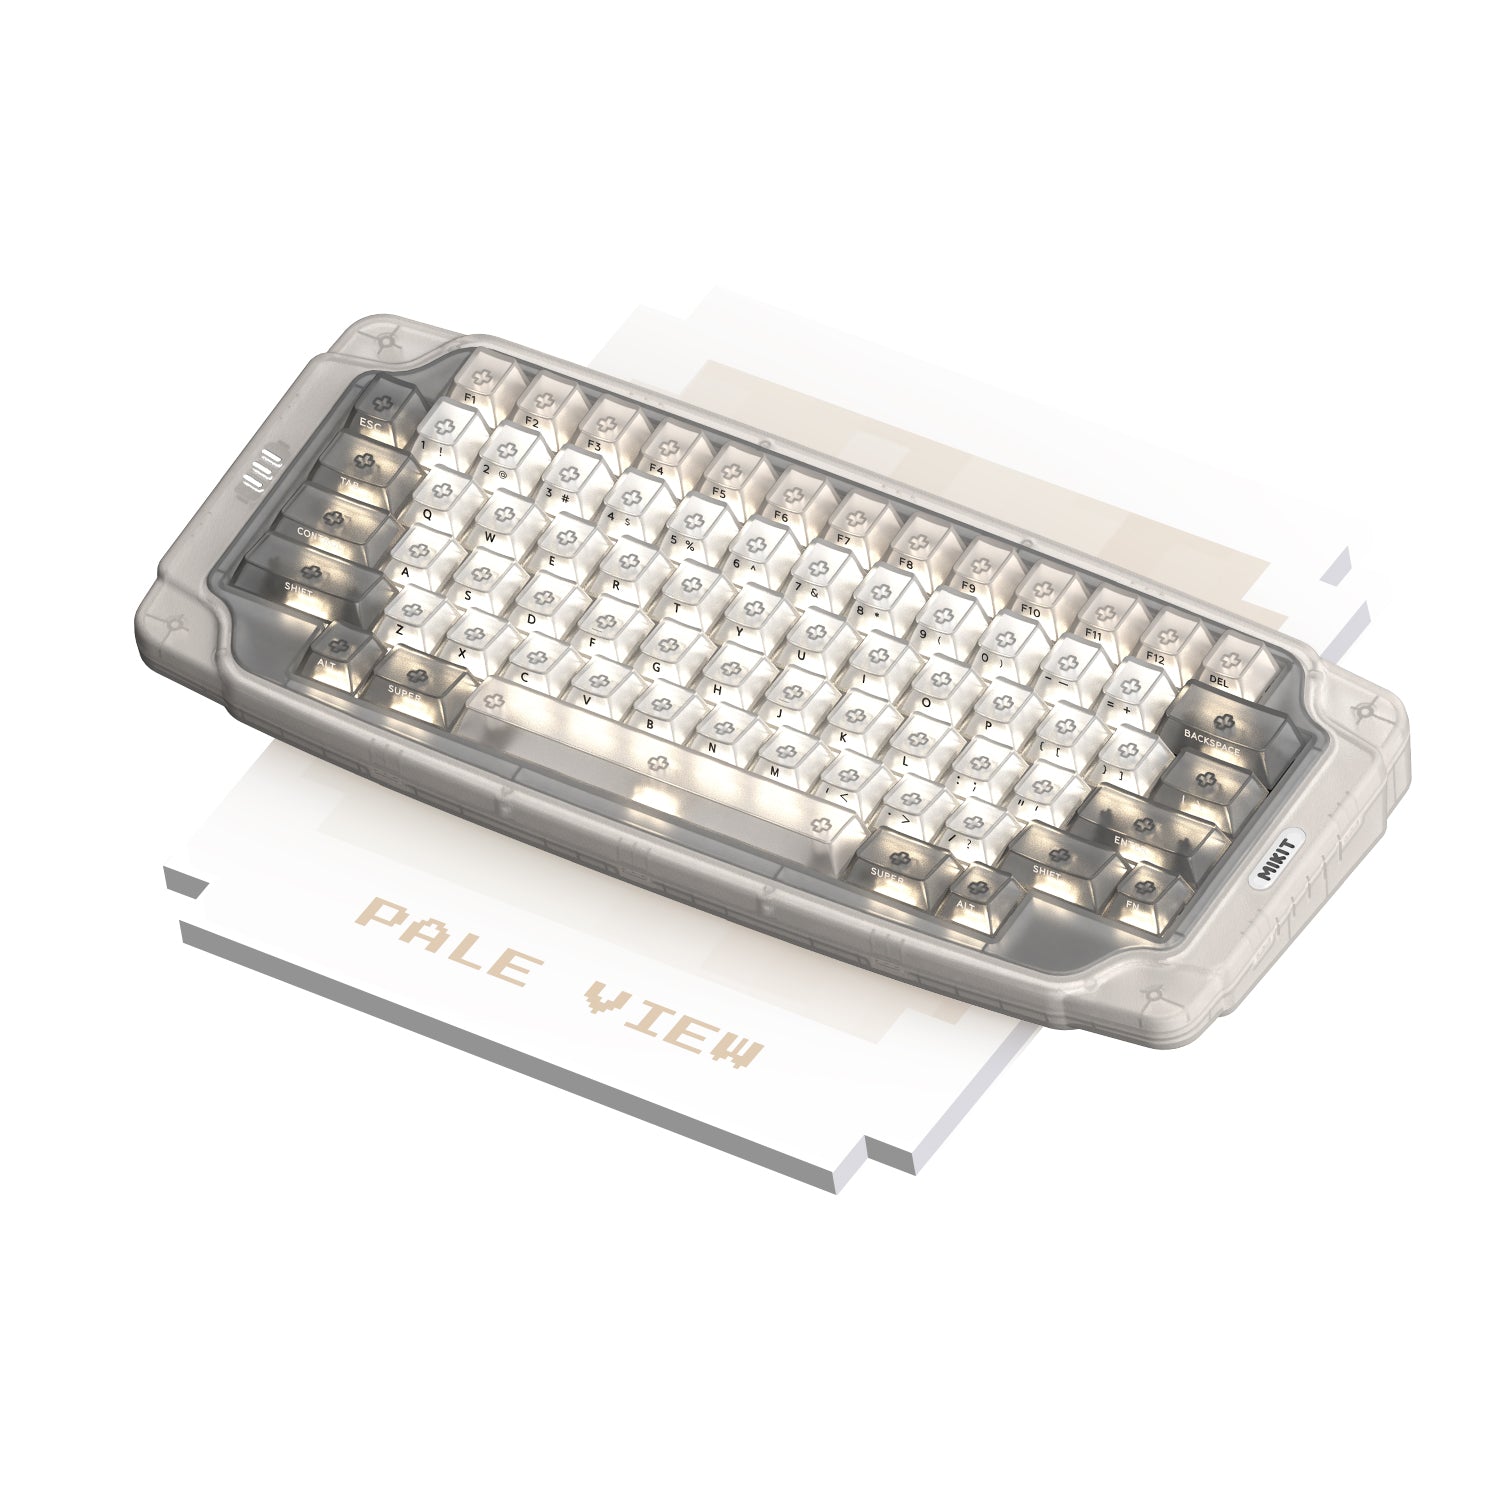 MIKIT MK72 PALE VIEW KEYBOARD #Color_Pale View